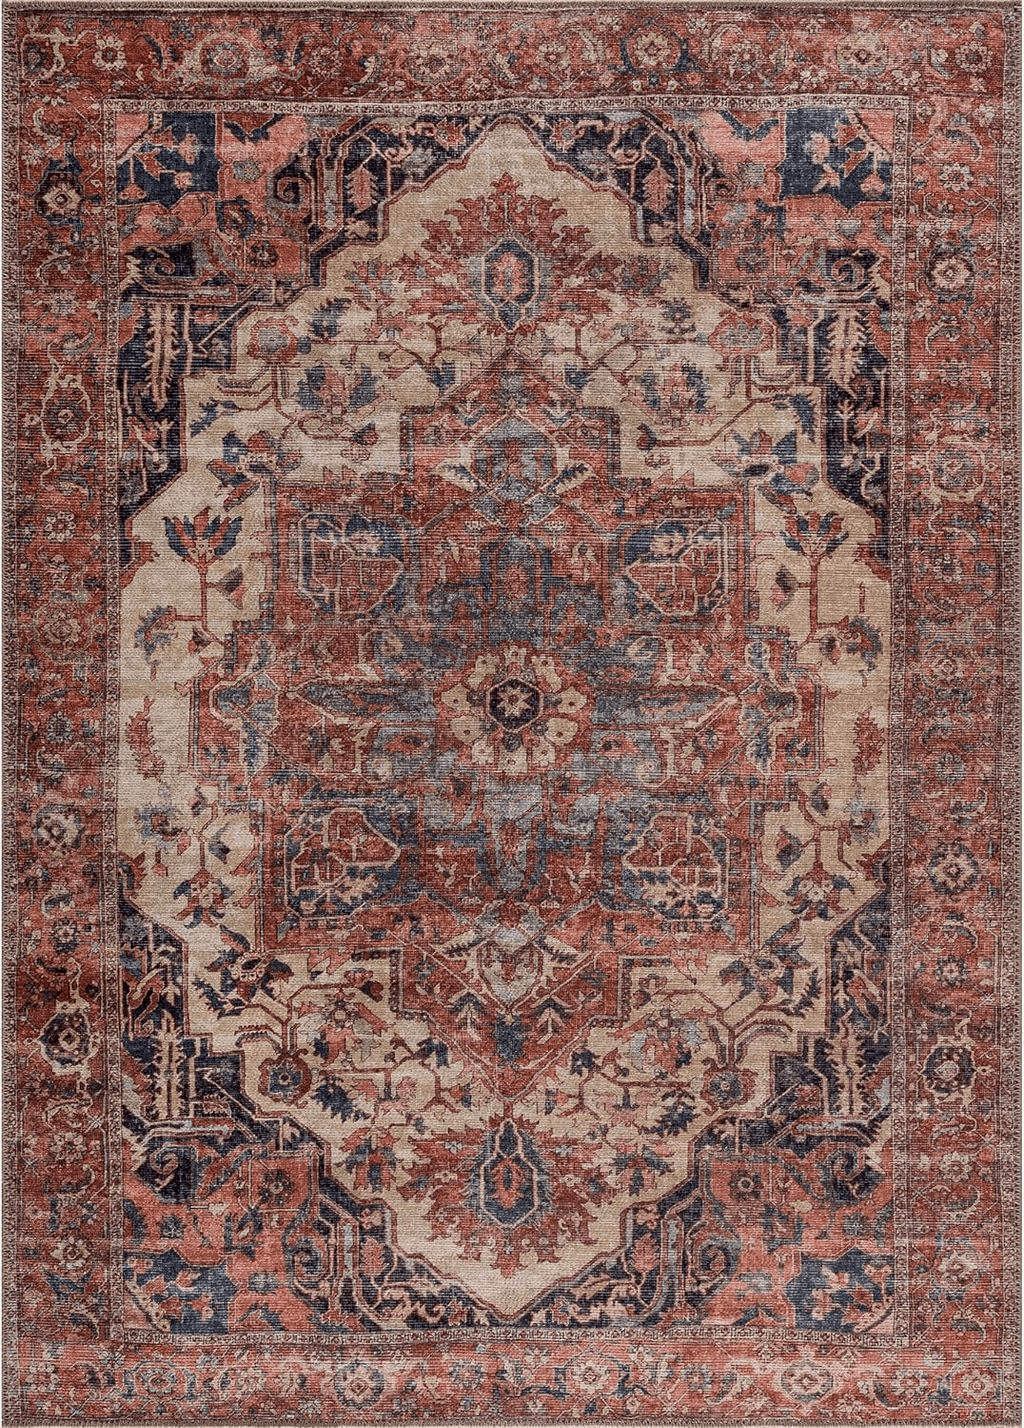 Caria Bloom Rugs Washable 3' x 5' Rug - Beige/Terracotta Traditional Area Rug for Living Room, Bedroom, Dining Room, and Kitchen - Exact Size: 3' x 5'